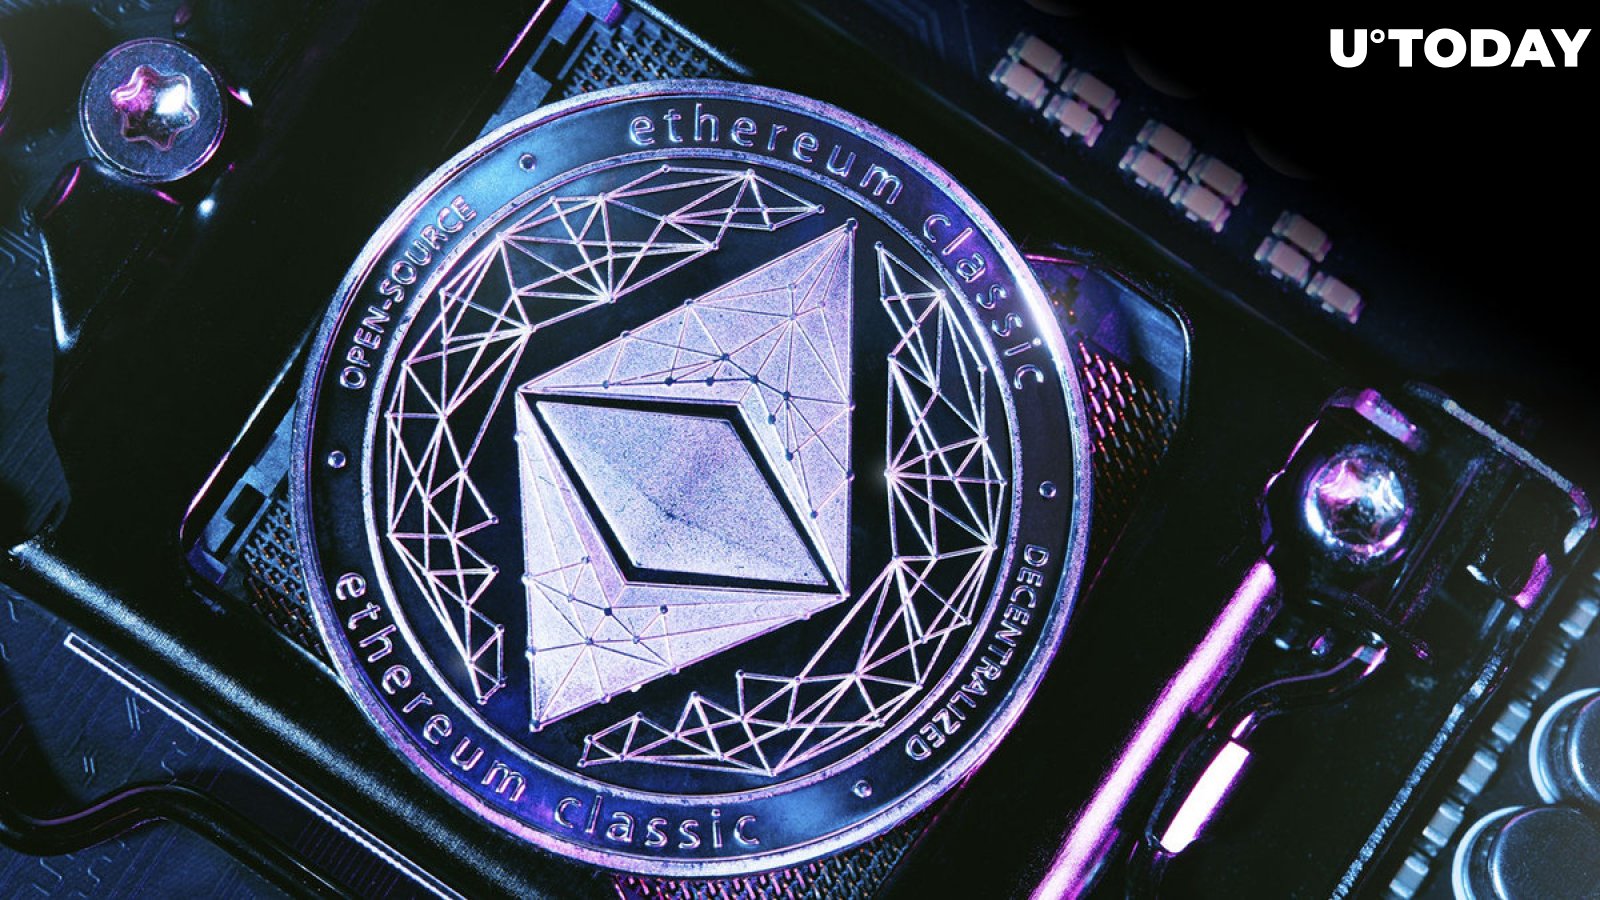 This Ethereum update is essential for the future, explains Vitalik Buterin